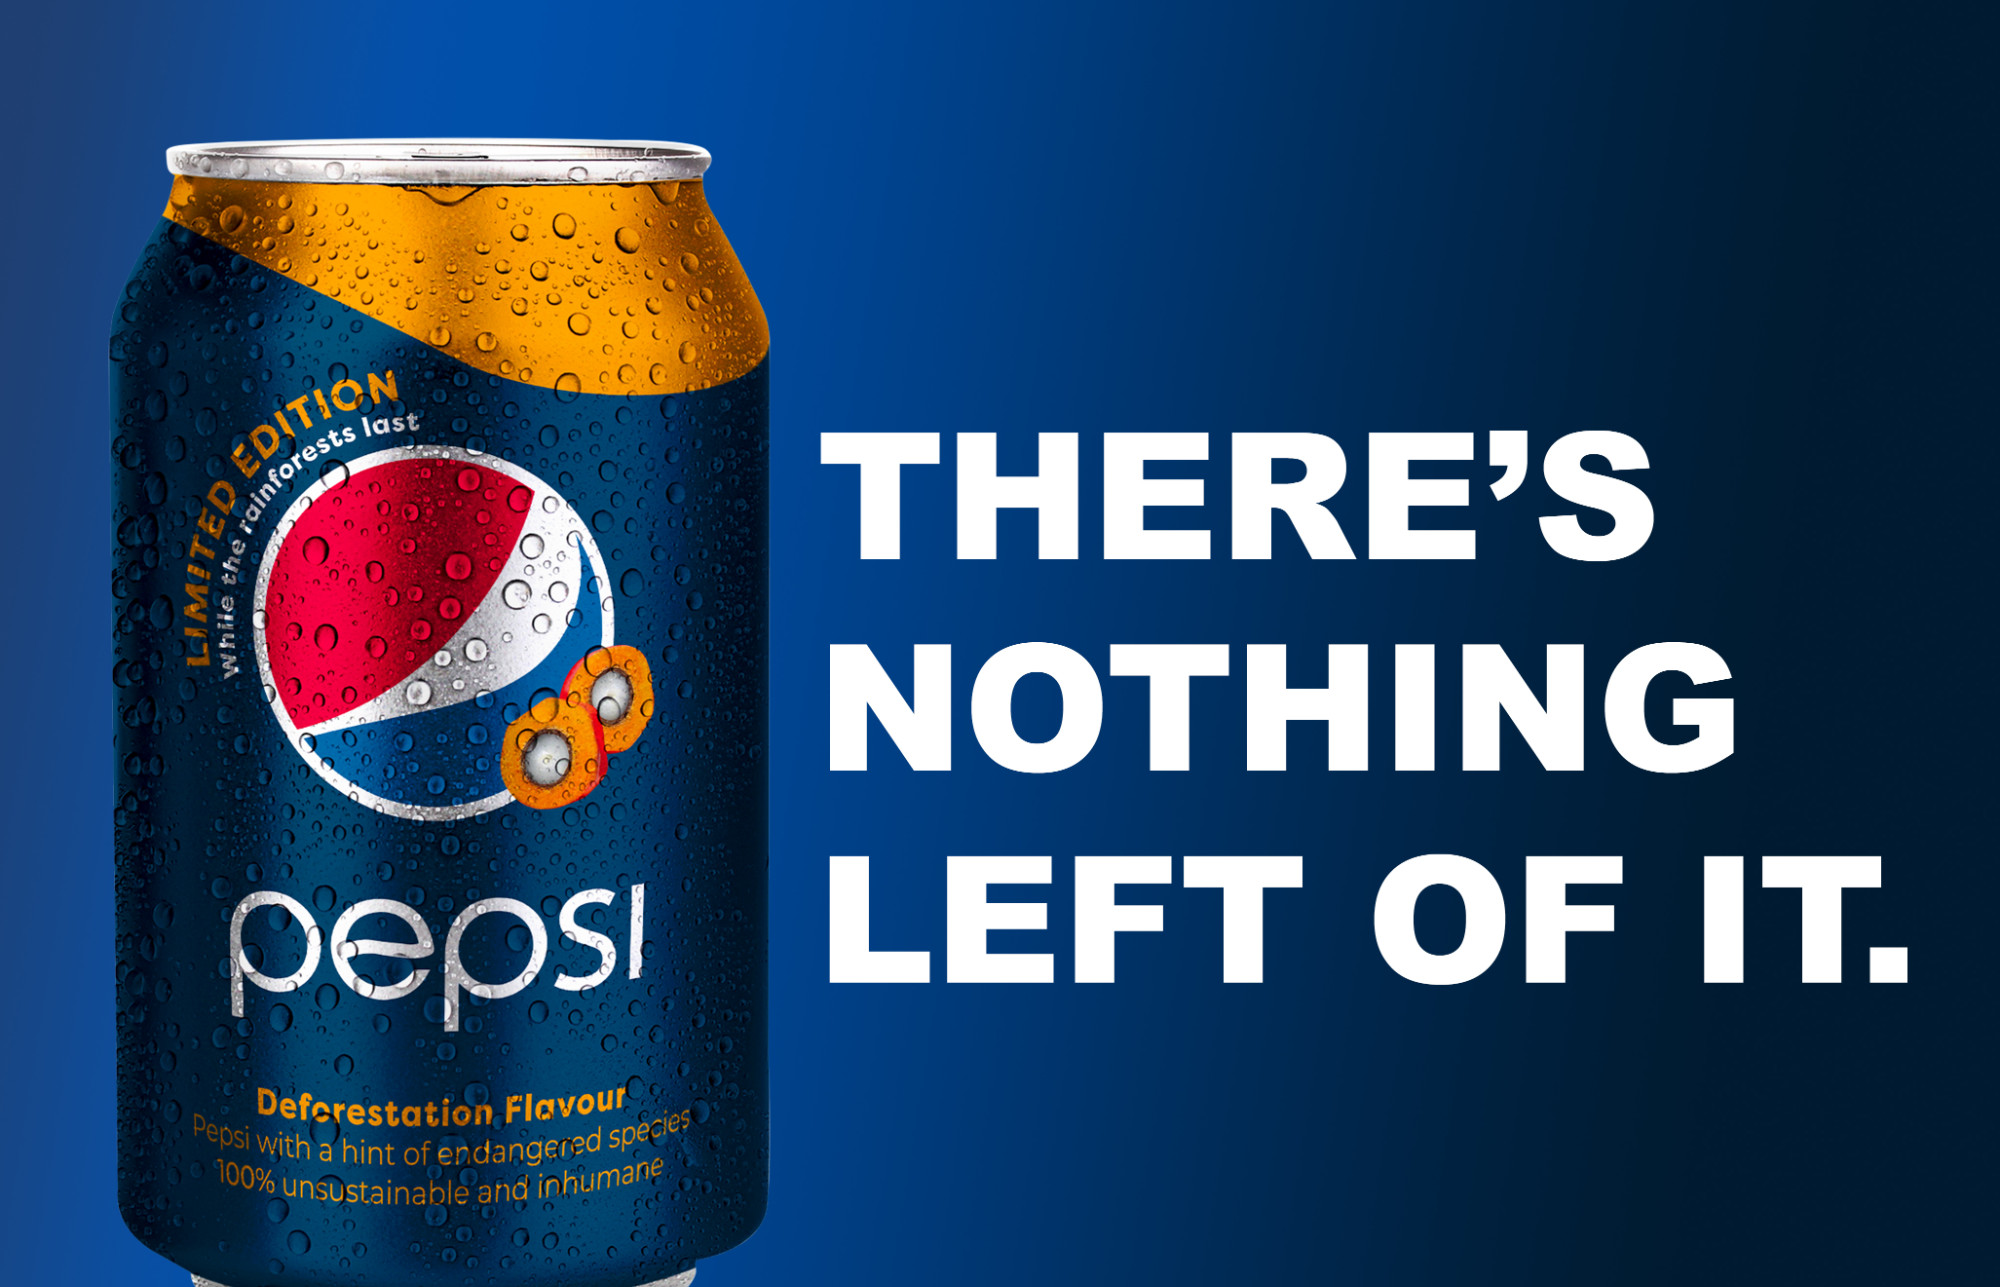 PepsiCo are one of the many large corporations contributing to the brutal destruction of rainforests. Using palm oil in every can of Pepsi, various endangered species are losing their homes and families for the cost of a refreshing, fizzy drink. Bryony Smart.